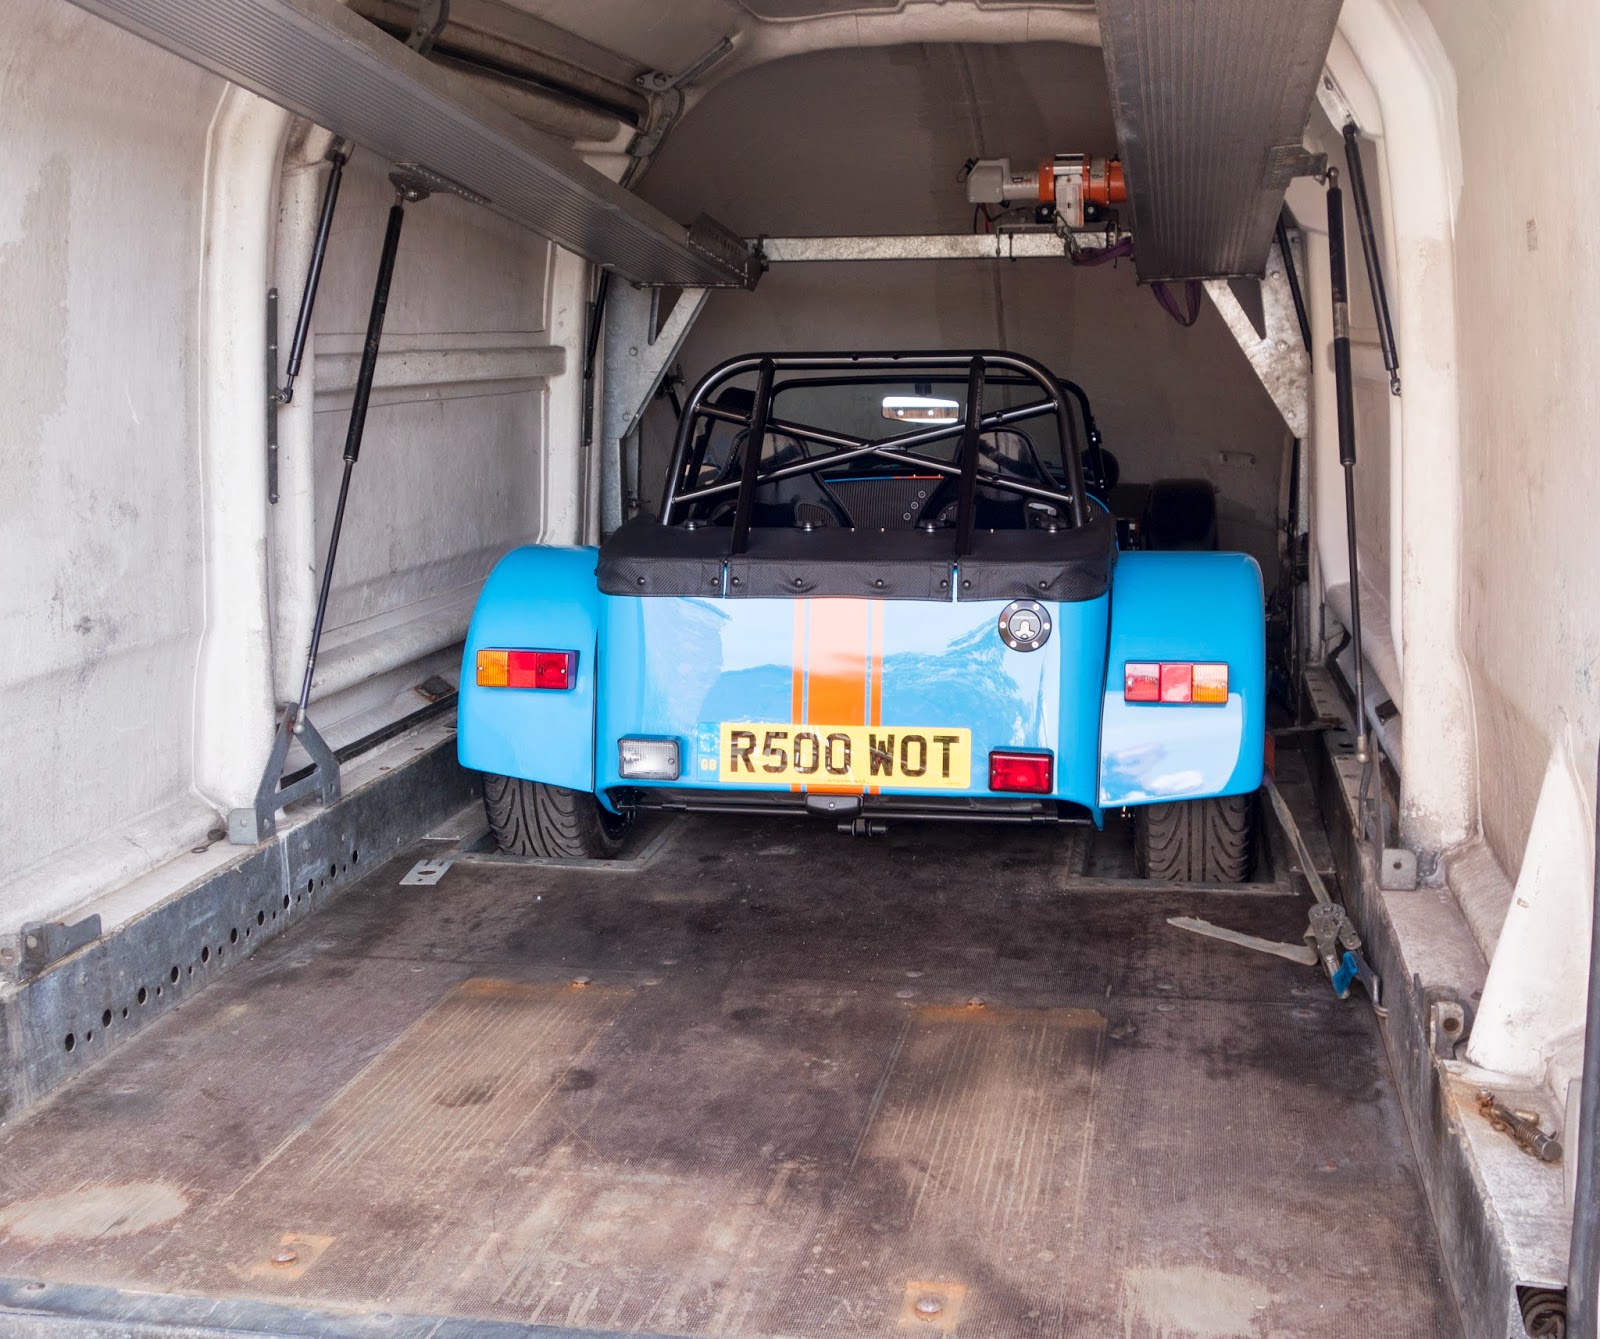 My Caterham R500 on the delivery van ready for unloading